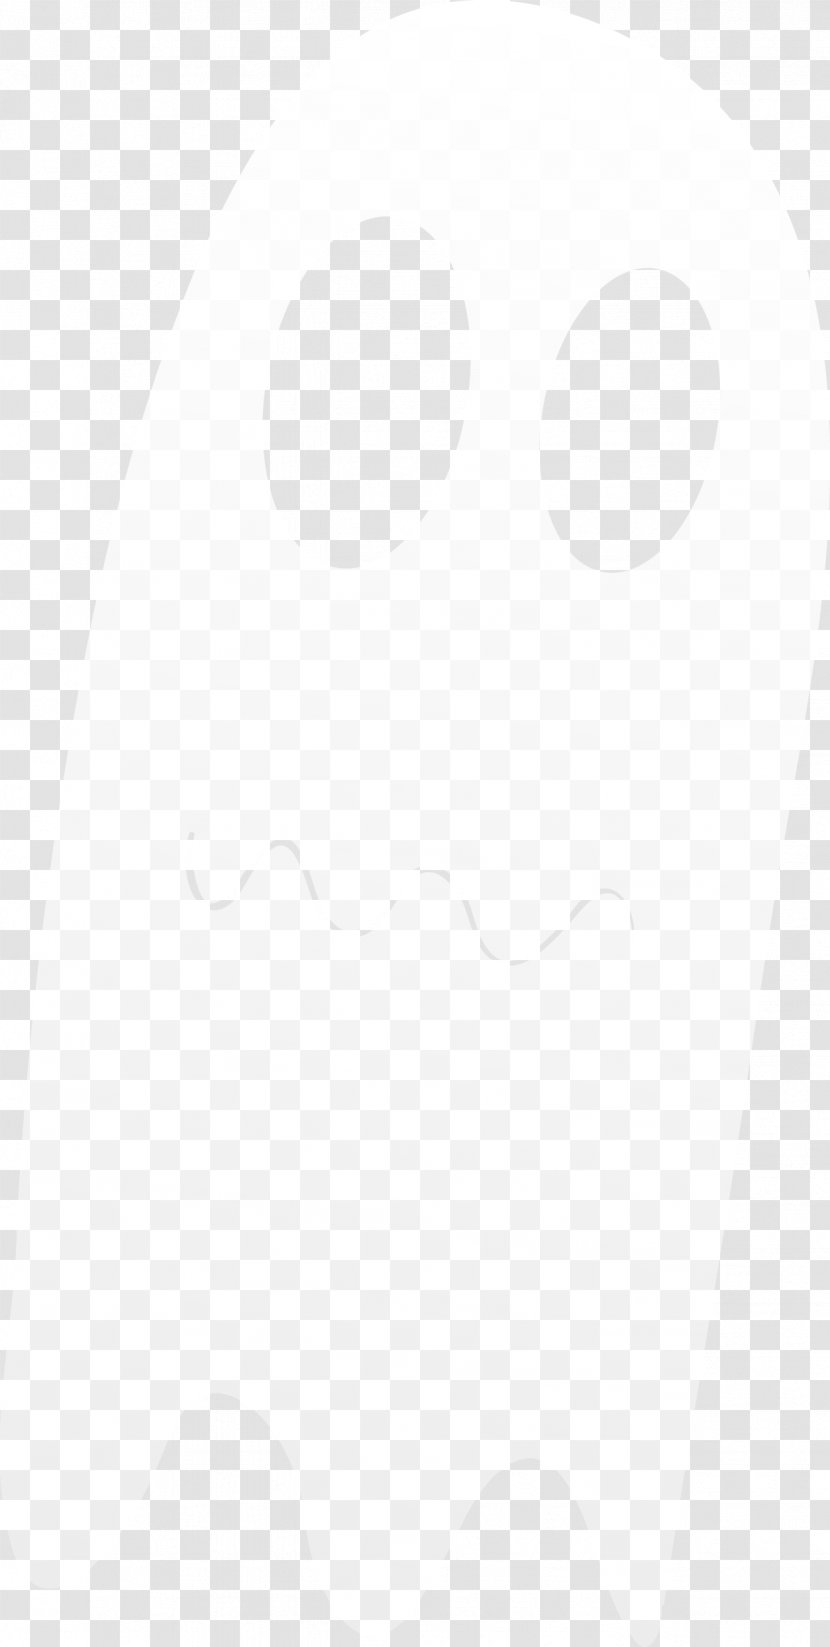 Halloween Ghost - Black White Transparent PNG